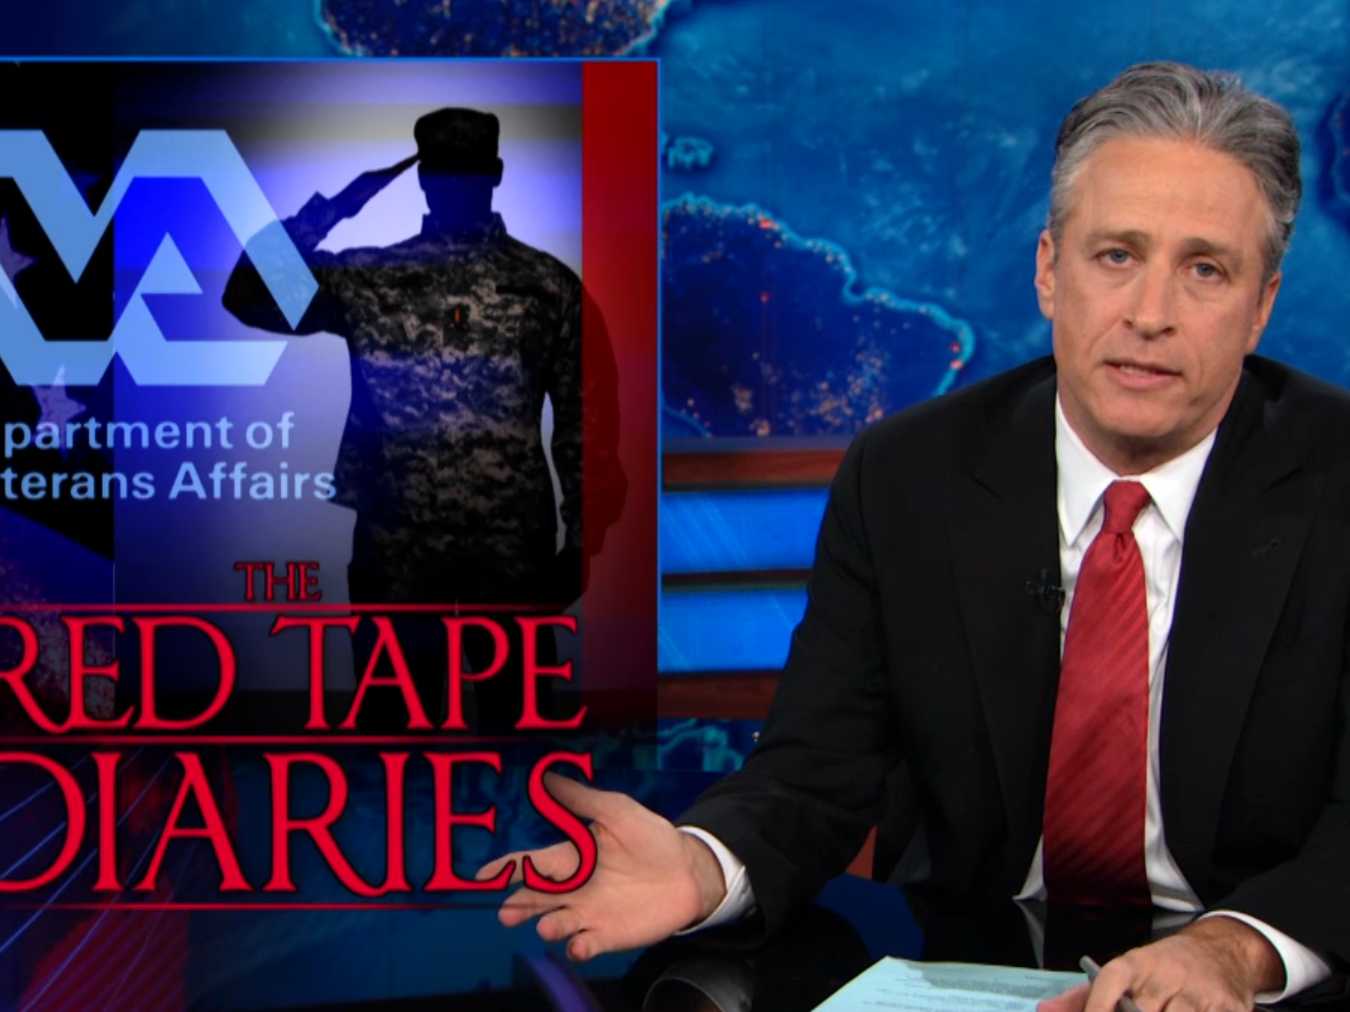 High Resolution Wallpaper | The Daily Show With Jon Stewart 1350x1012 px